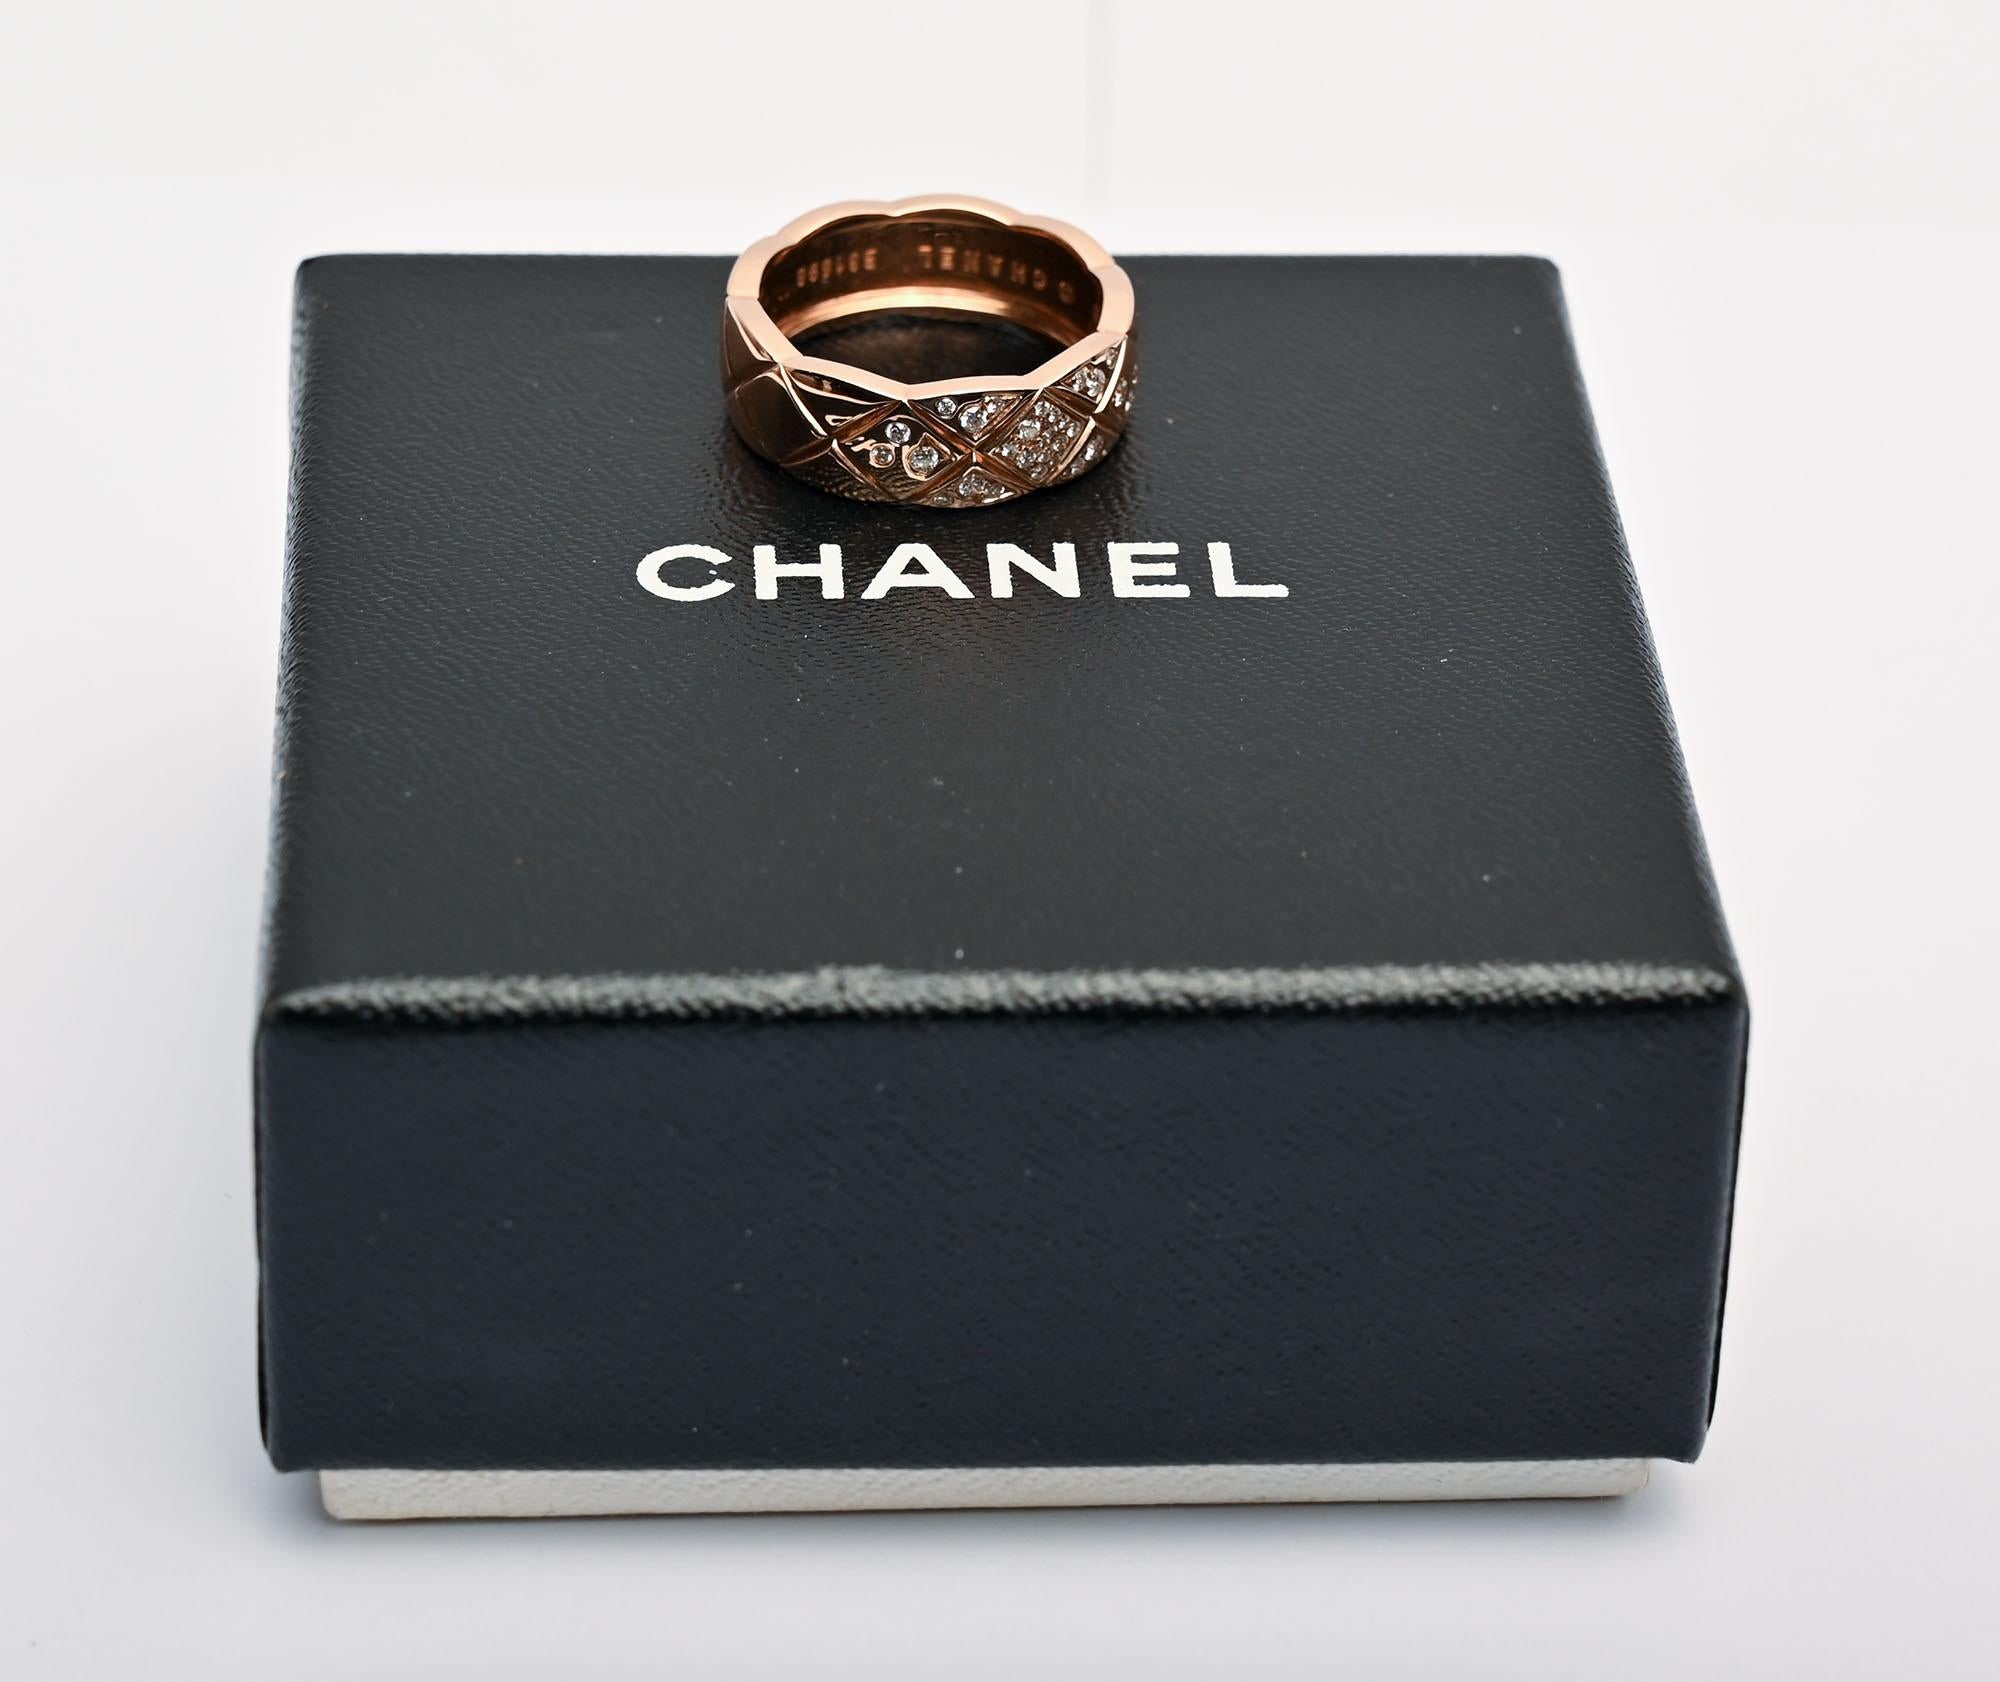 This Coco Crush ring is one of Chanel's most popular and well known band rings. It has Chanel's classic quilted design throughout. It is made of what Chanel refers to as beige gold, which most would call rose or pink gold. The ring has 31 brilliant